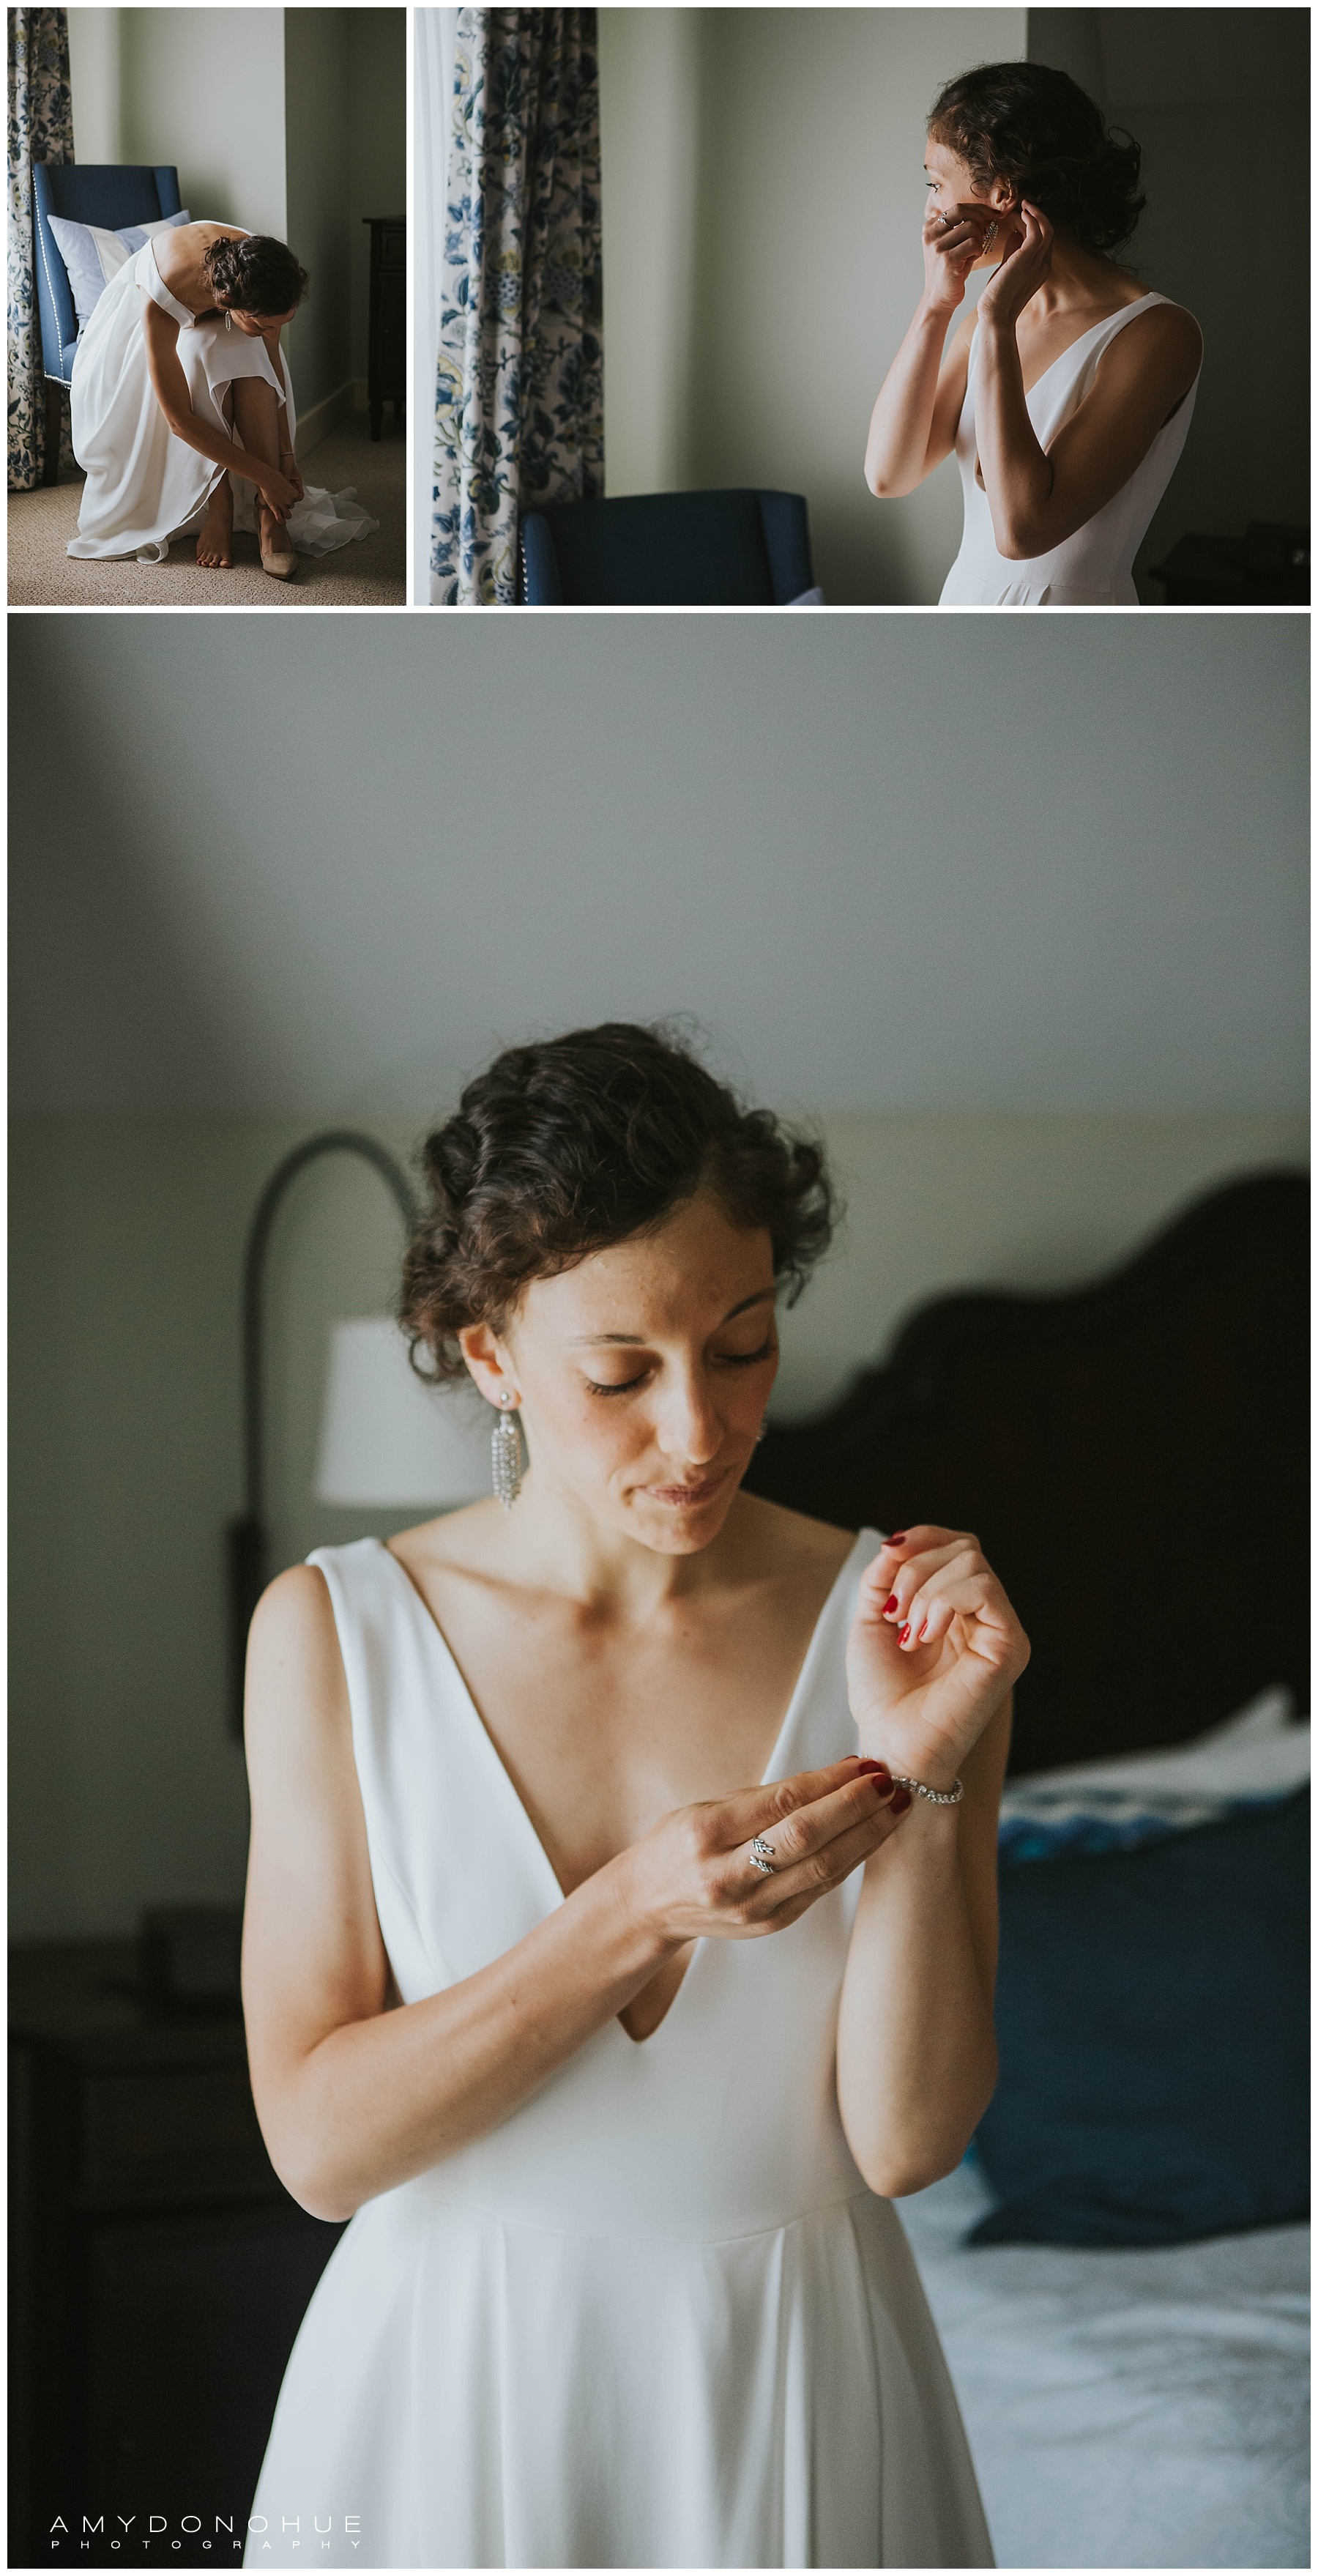 Bride getting ready. © Amy Donohue Photography